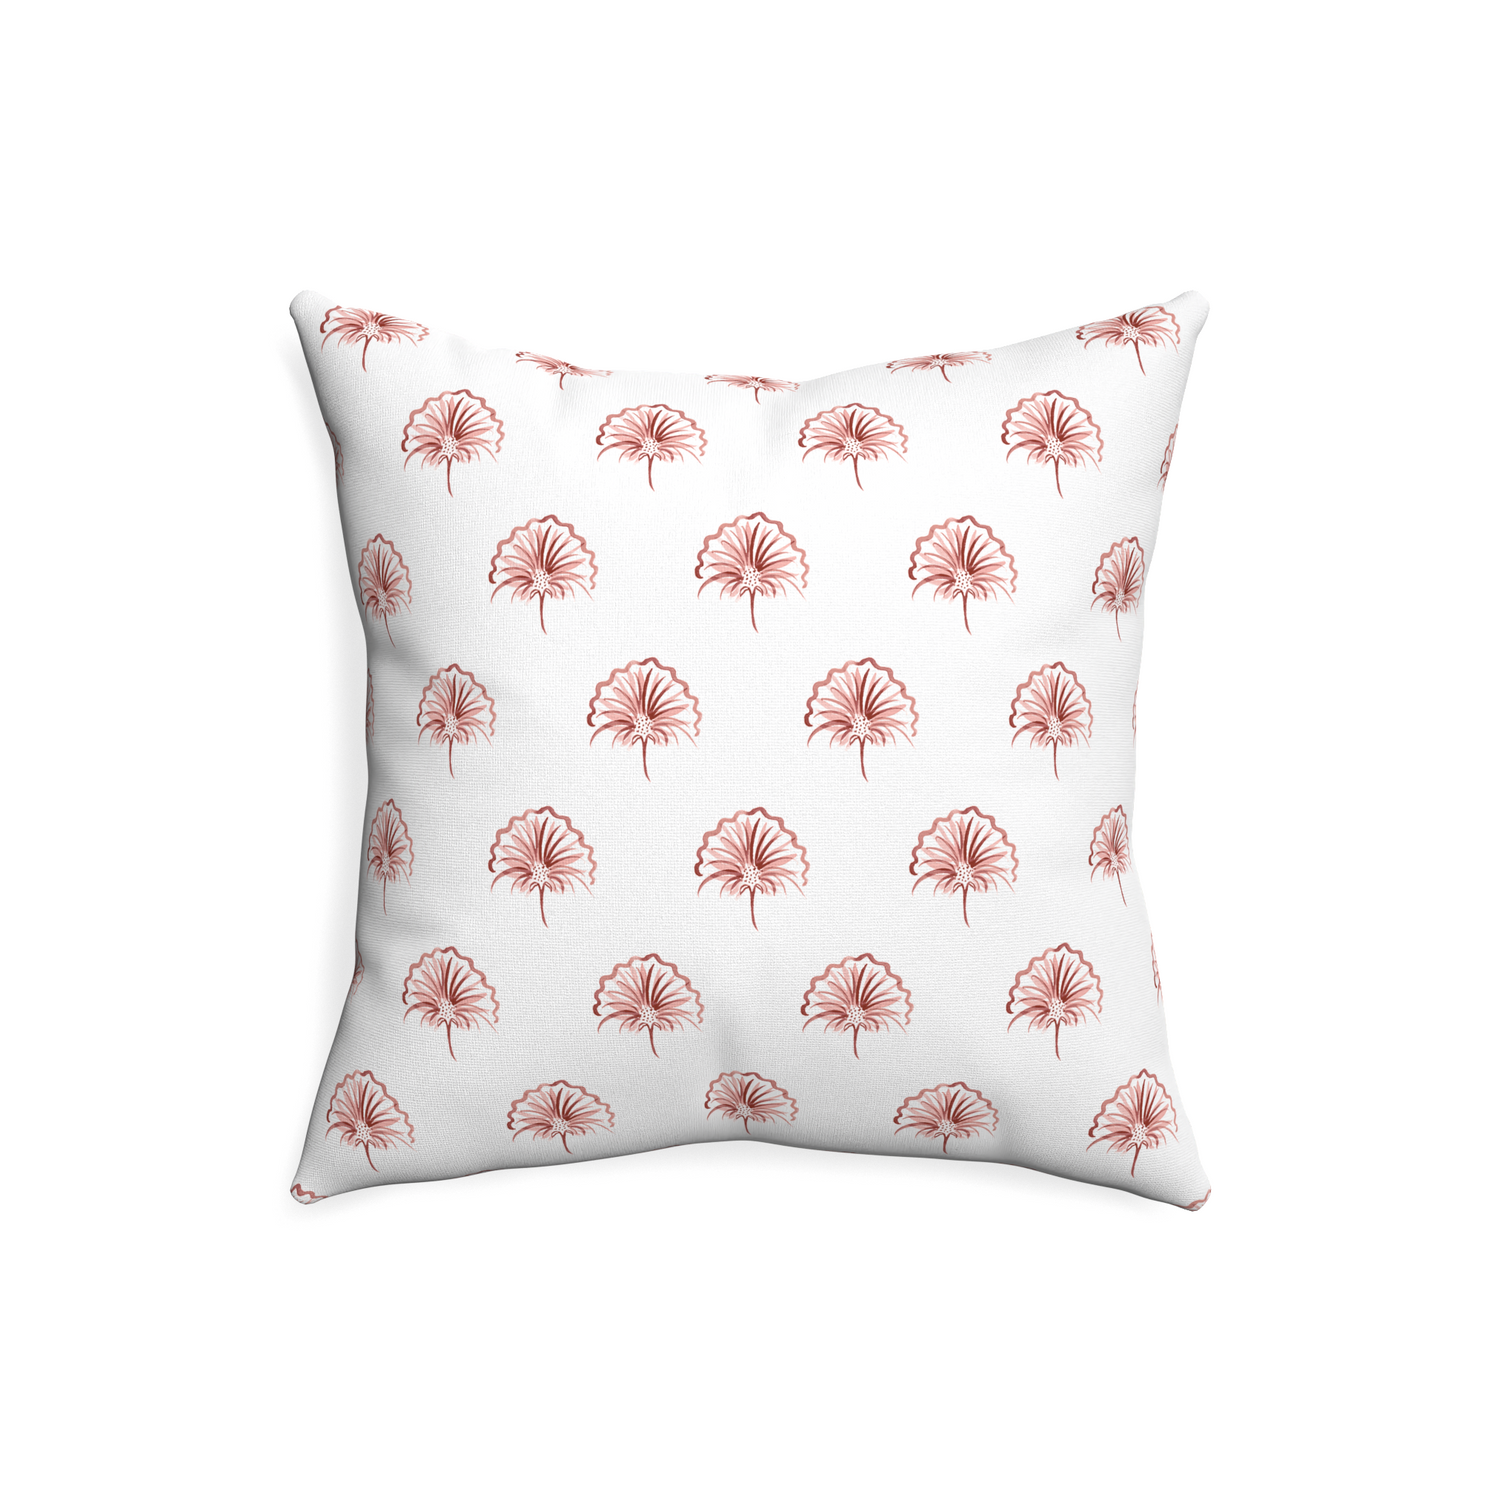 20-square penelope rose custom floral pinkpillow with none on white background